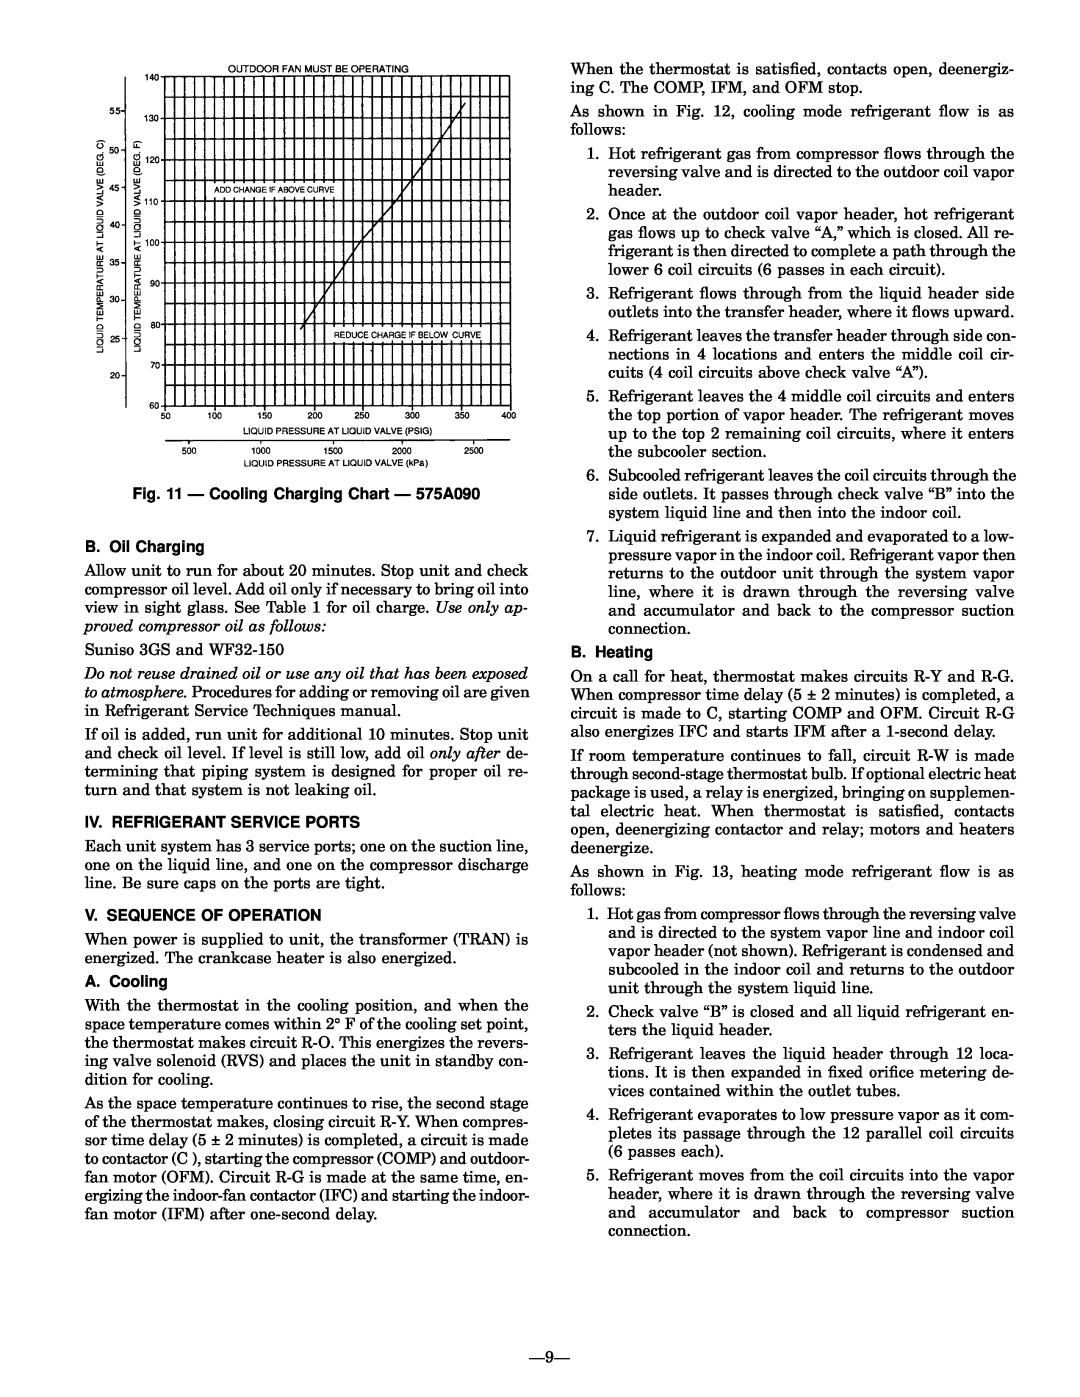 Bryant Ð Cooling Charging Chart Ð 575A090, B. Oil Charging, Iv. Refrigerant Service Ports, V. Sequence Of Operation 